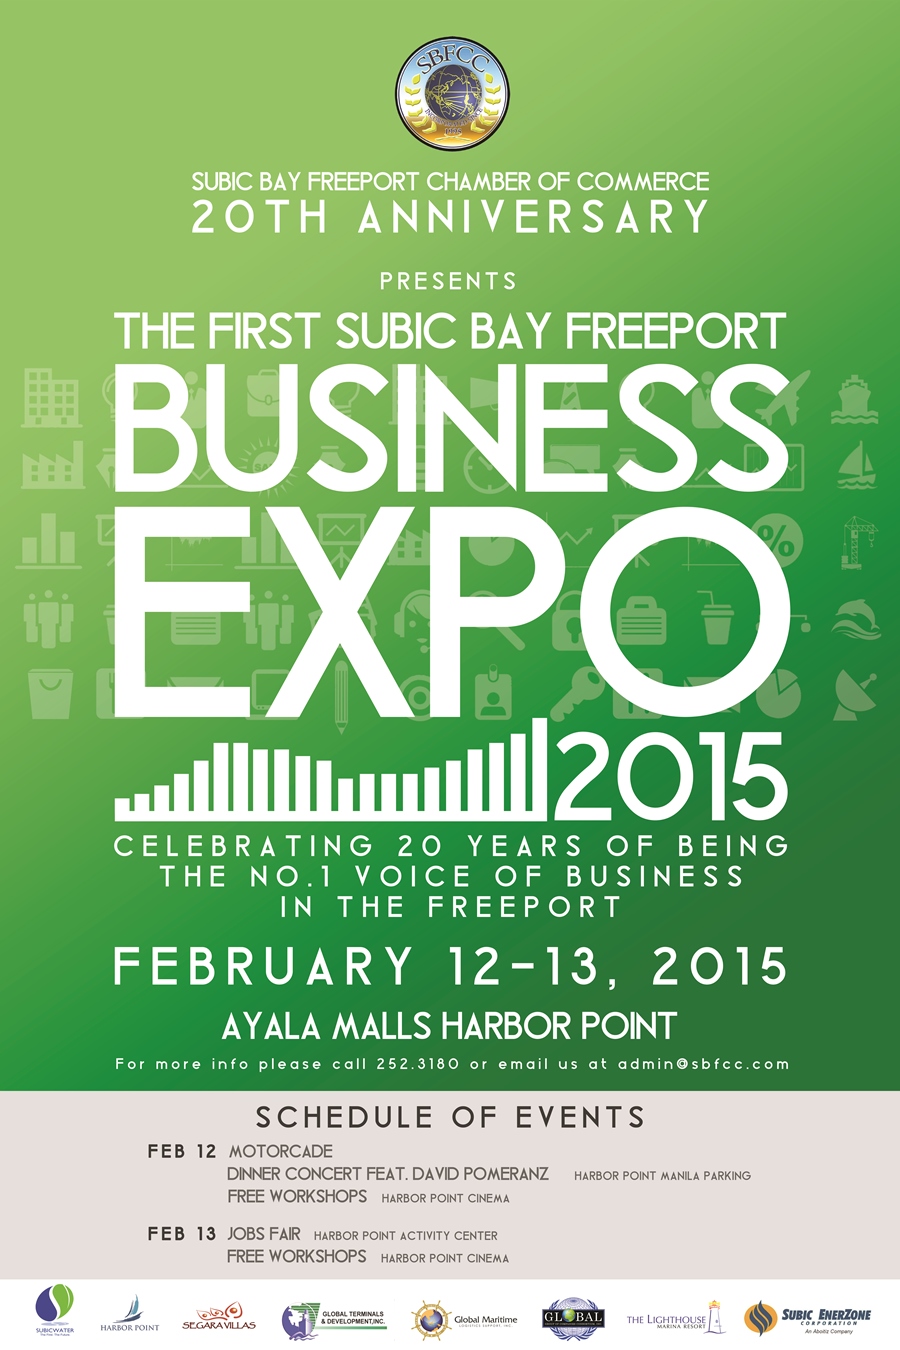 SBF Business Expo 2015